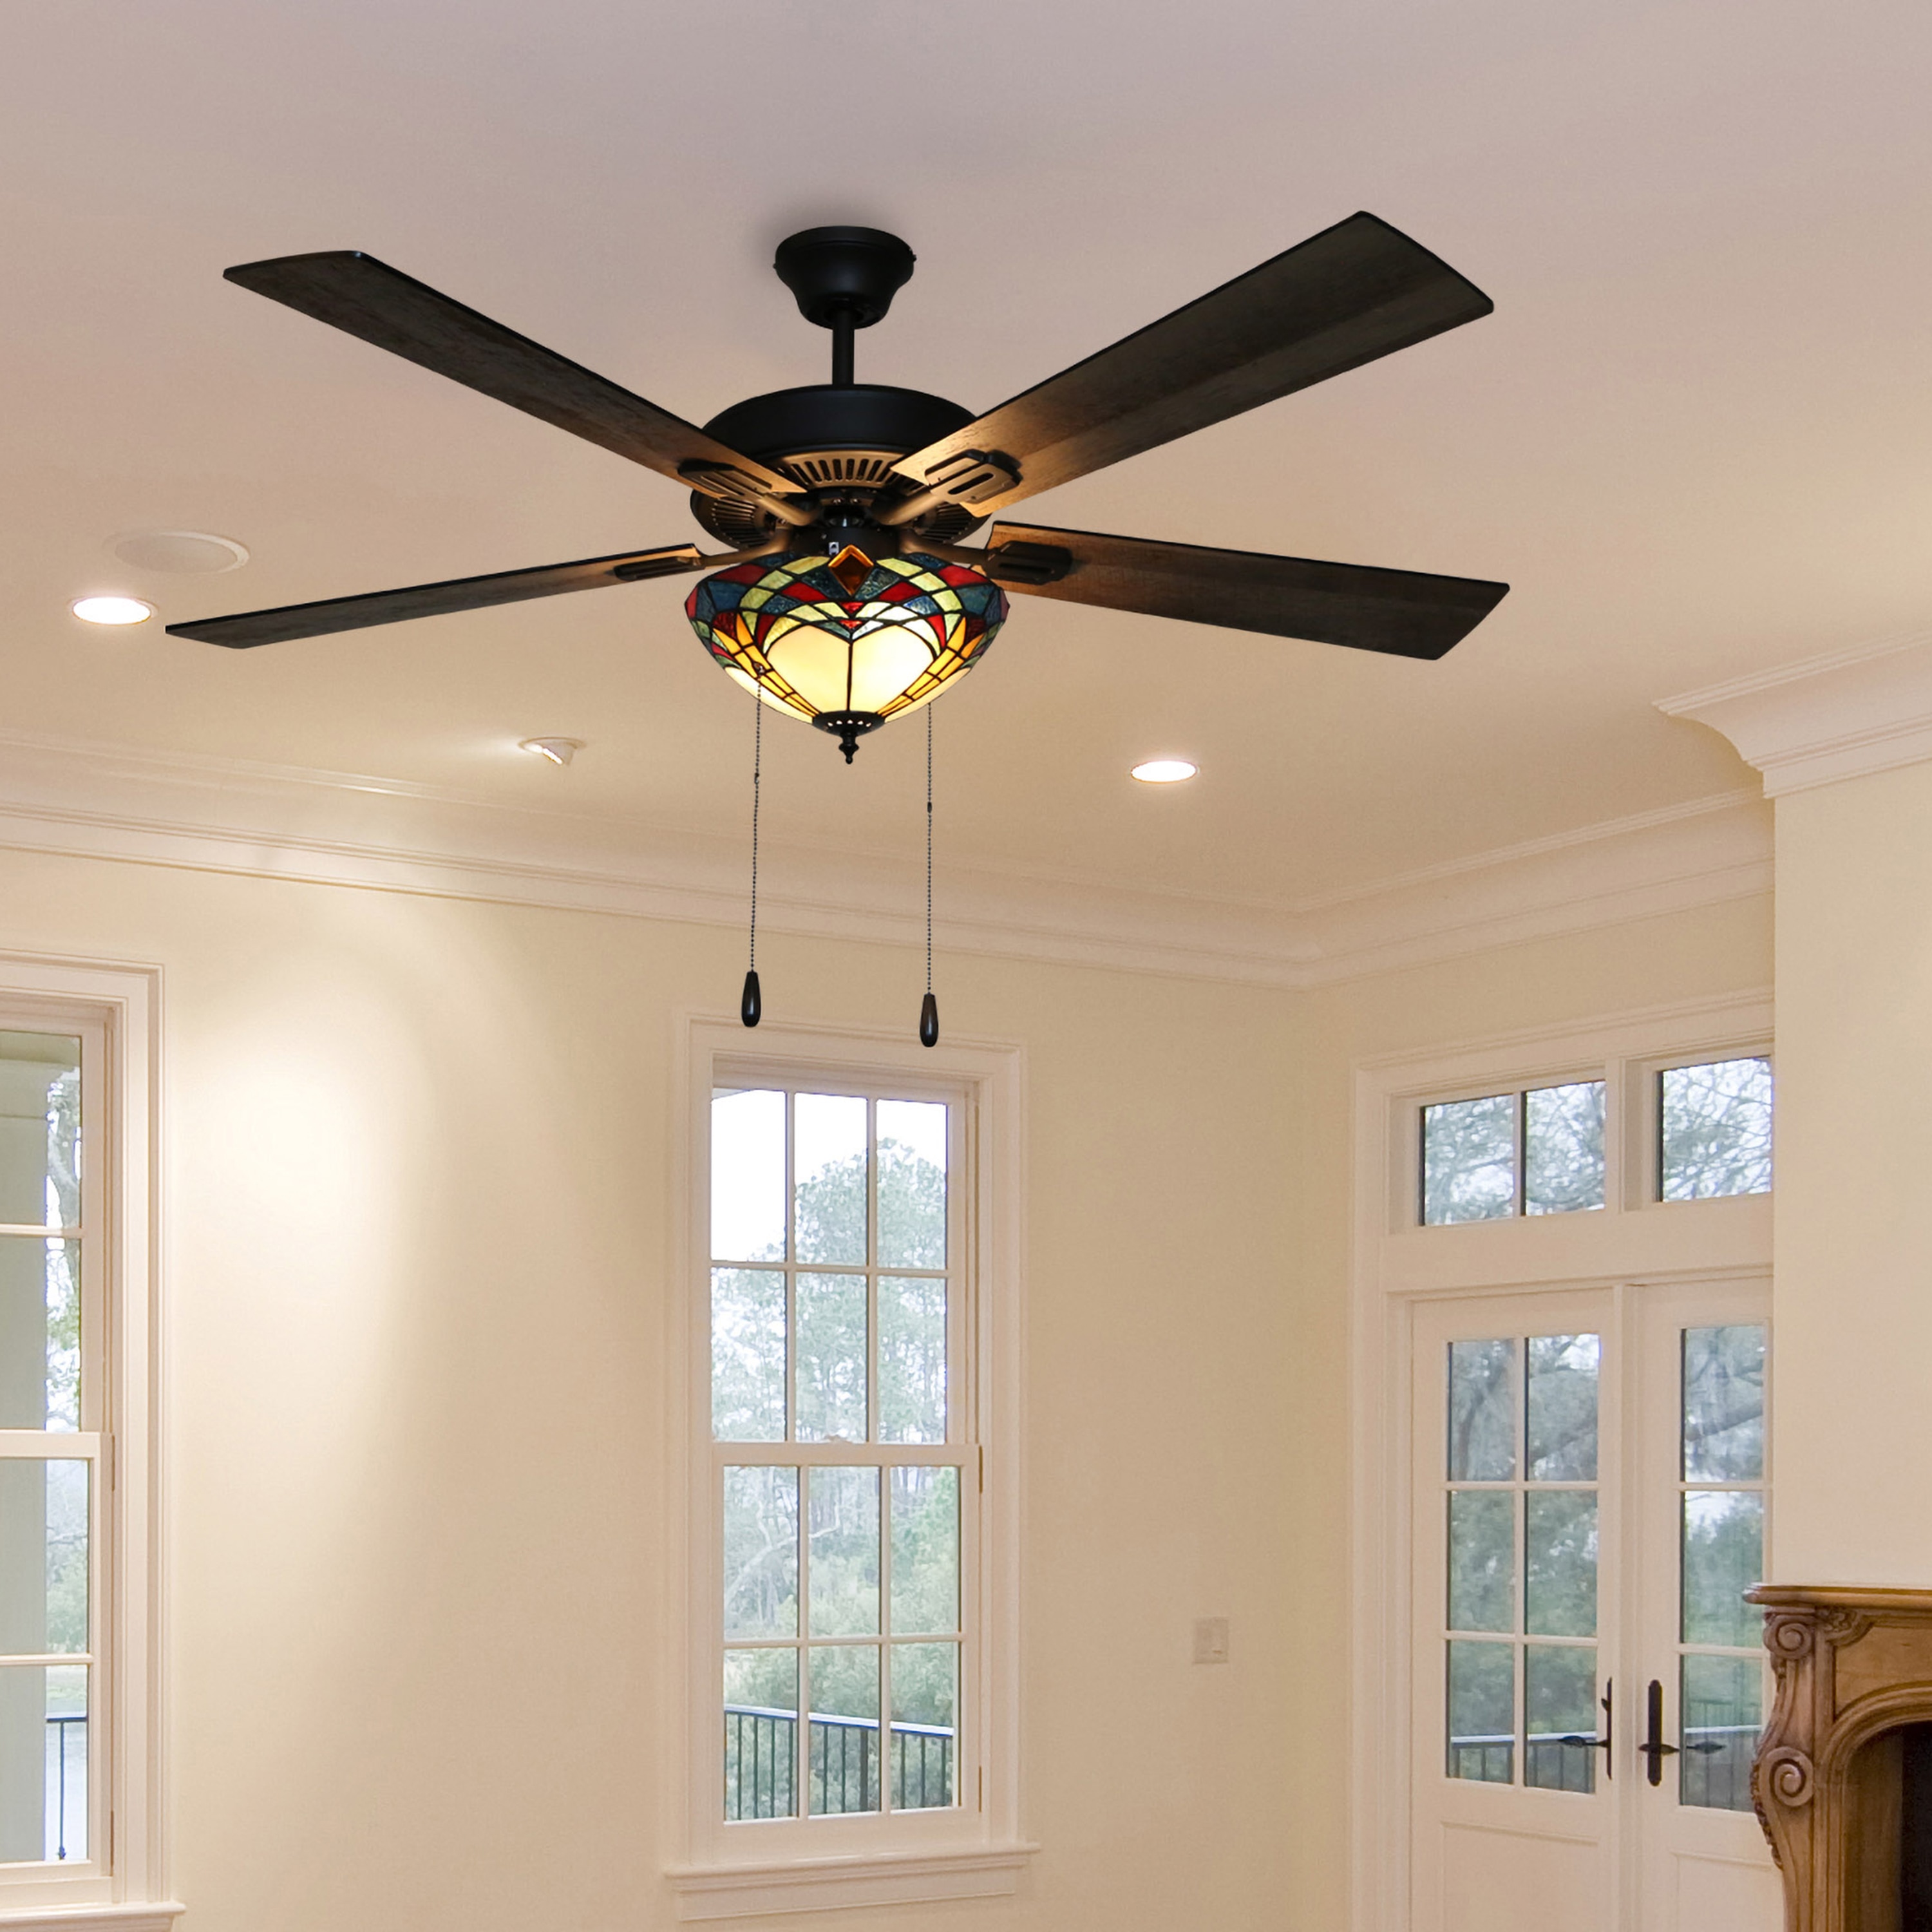 52" ORB oil rubbed bronze ceiling fan with 4 light tea stain glass va md 